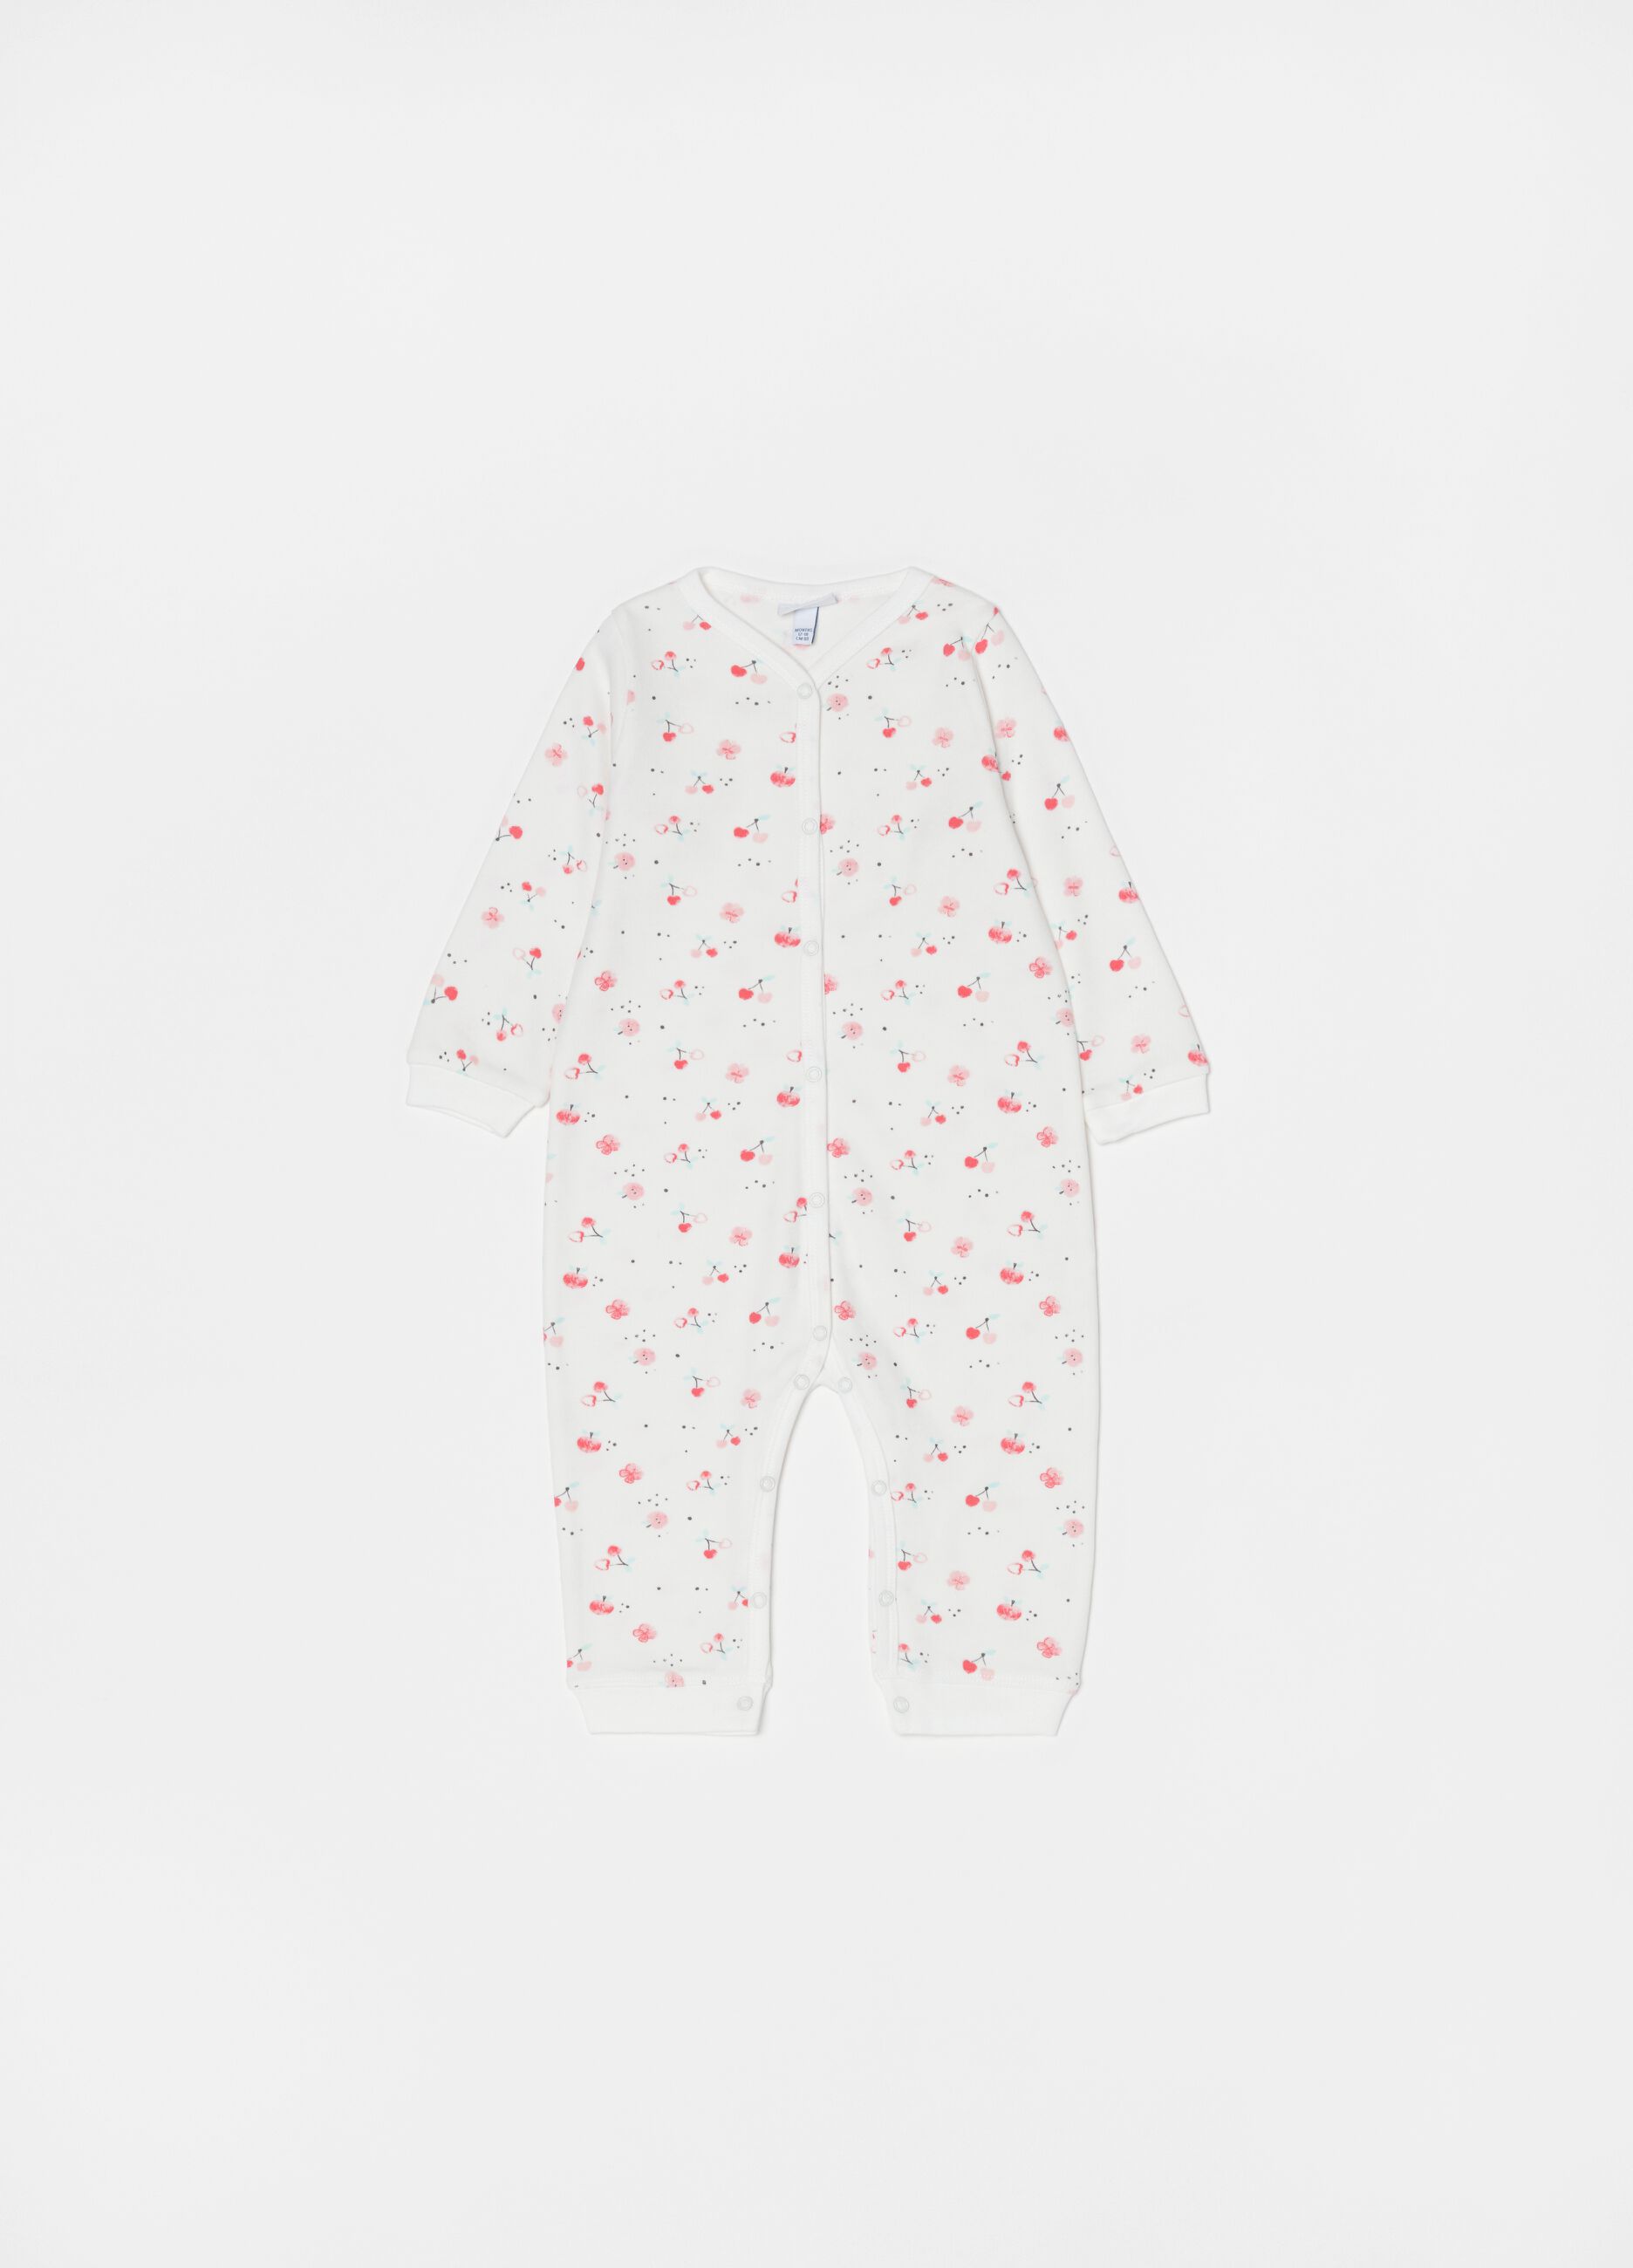 Cotton onesie with feet and cherries pattern